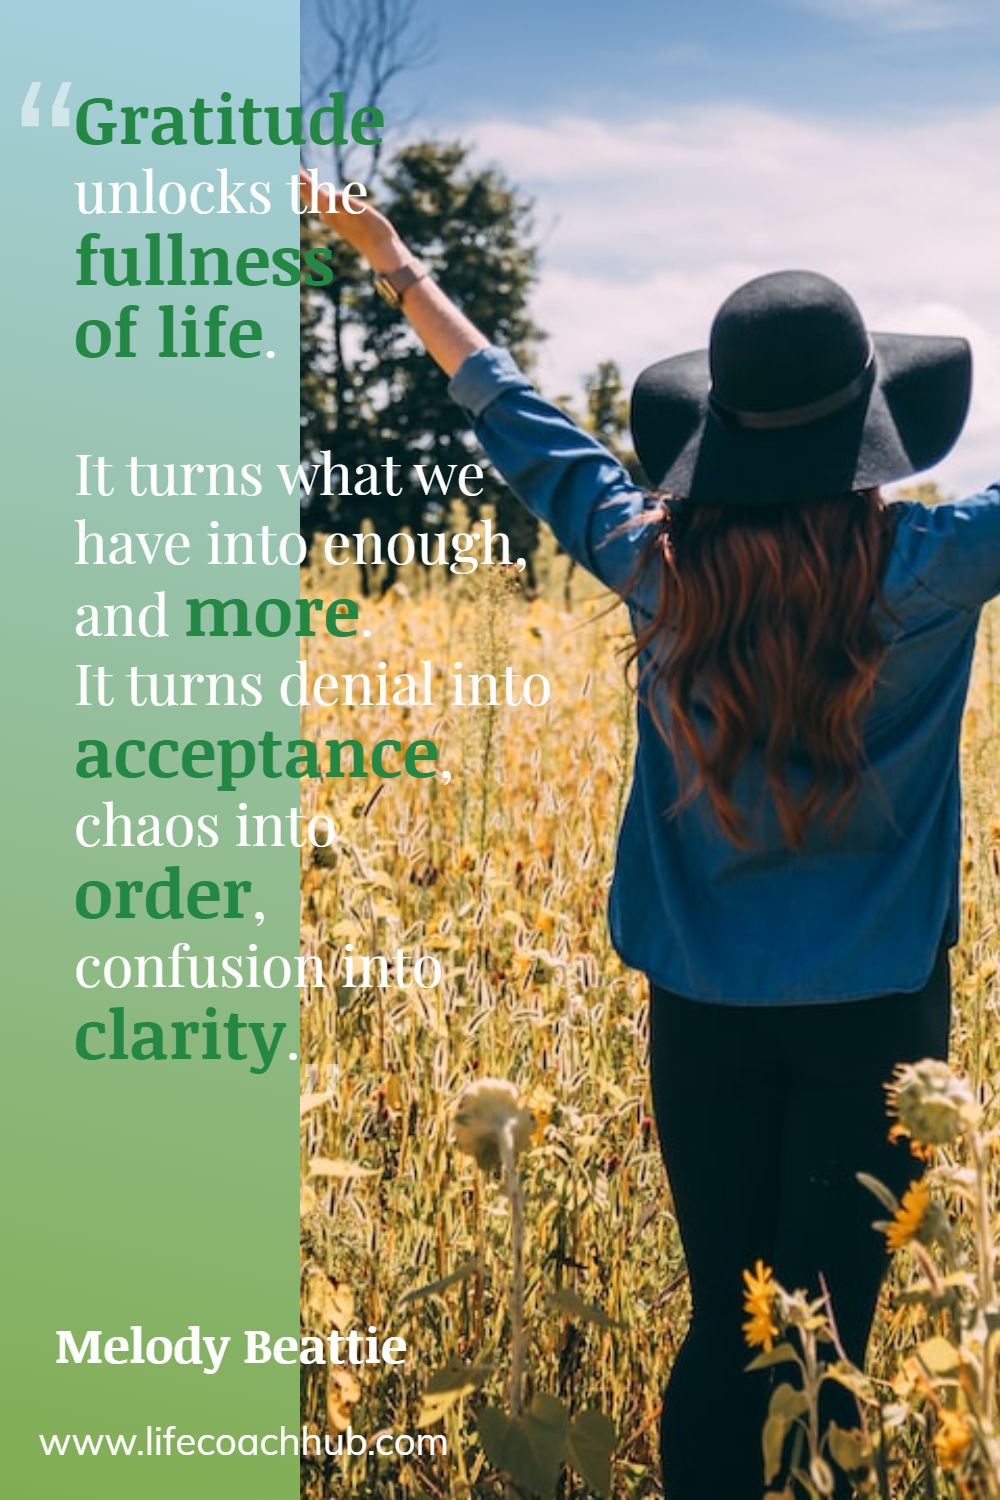 Gratitude unlocks the fullness of life. It turns what we have into enough, and more. It turns denial into acceptance, chaos into order, confusion into clarity. Melody Beattie Coaching Quote